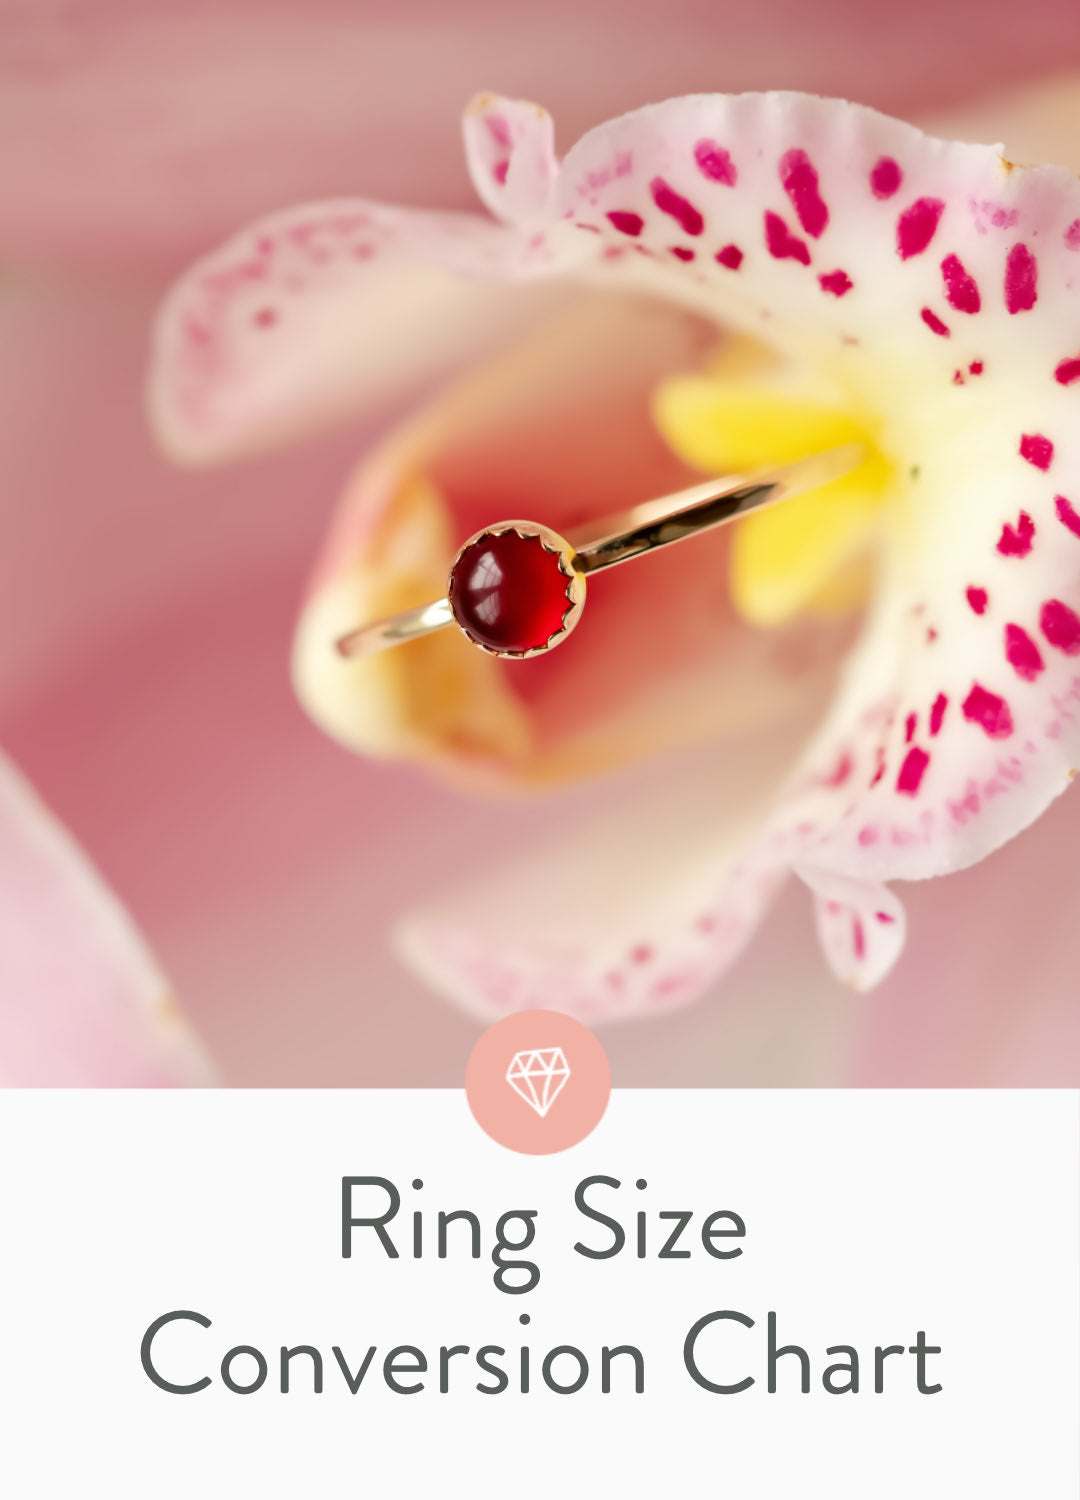 Ring size chart with Australian ring sizes in mm and inches for men and women.